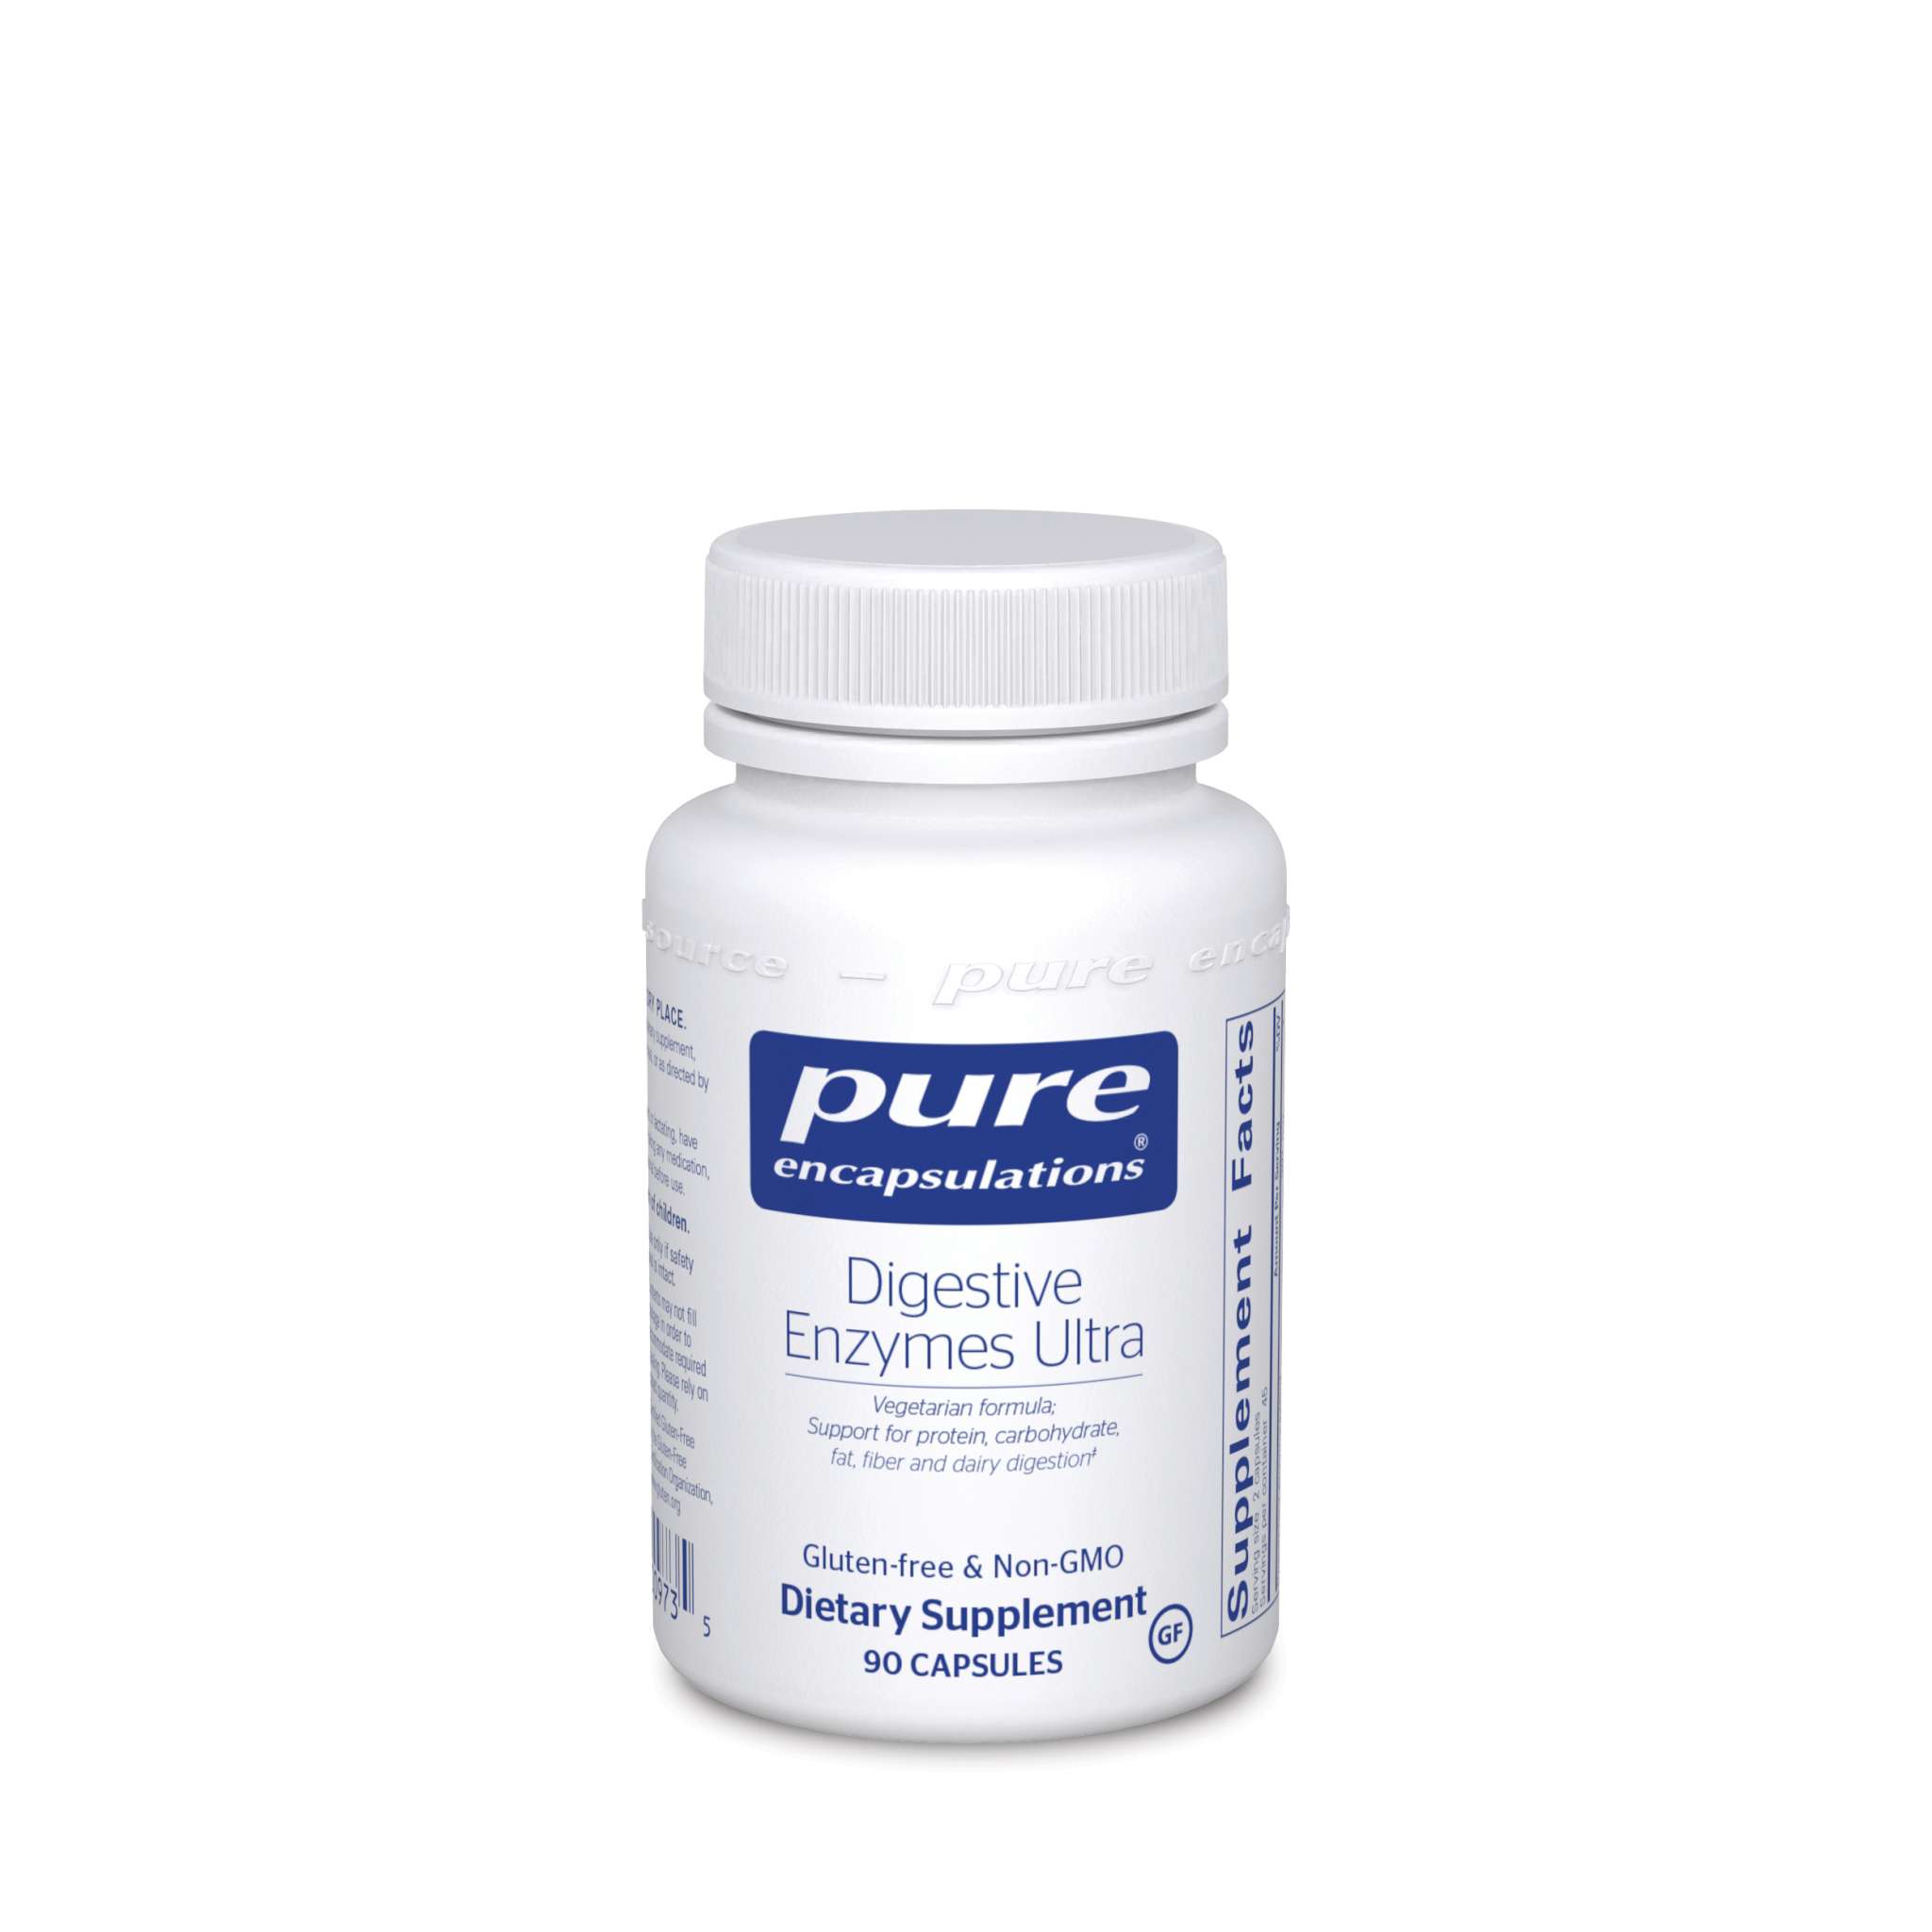 Pure Encapsulations - Digestive Enzymes Ultra